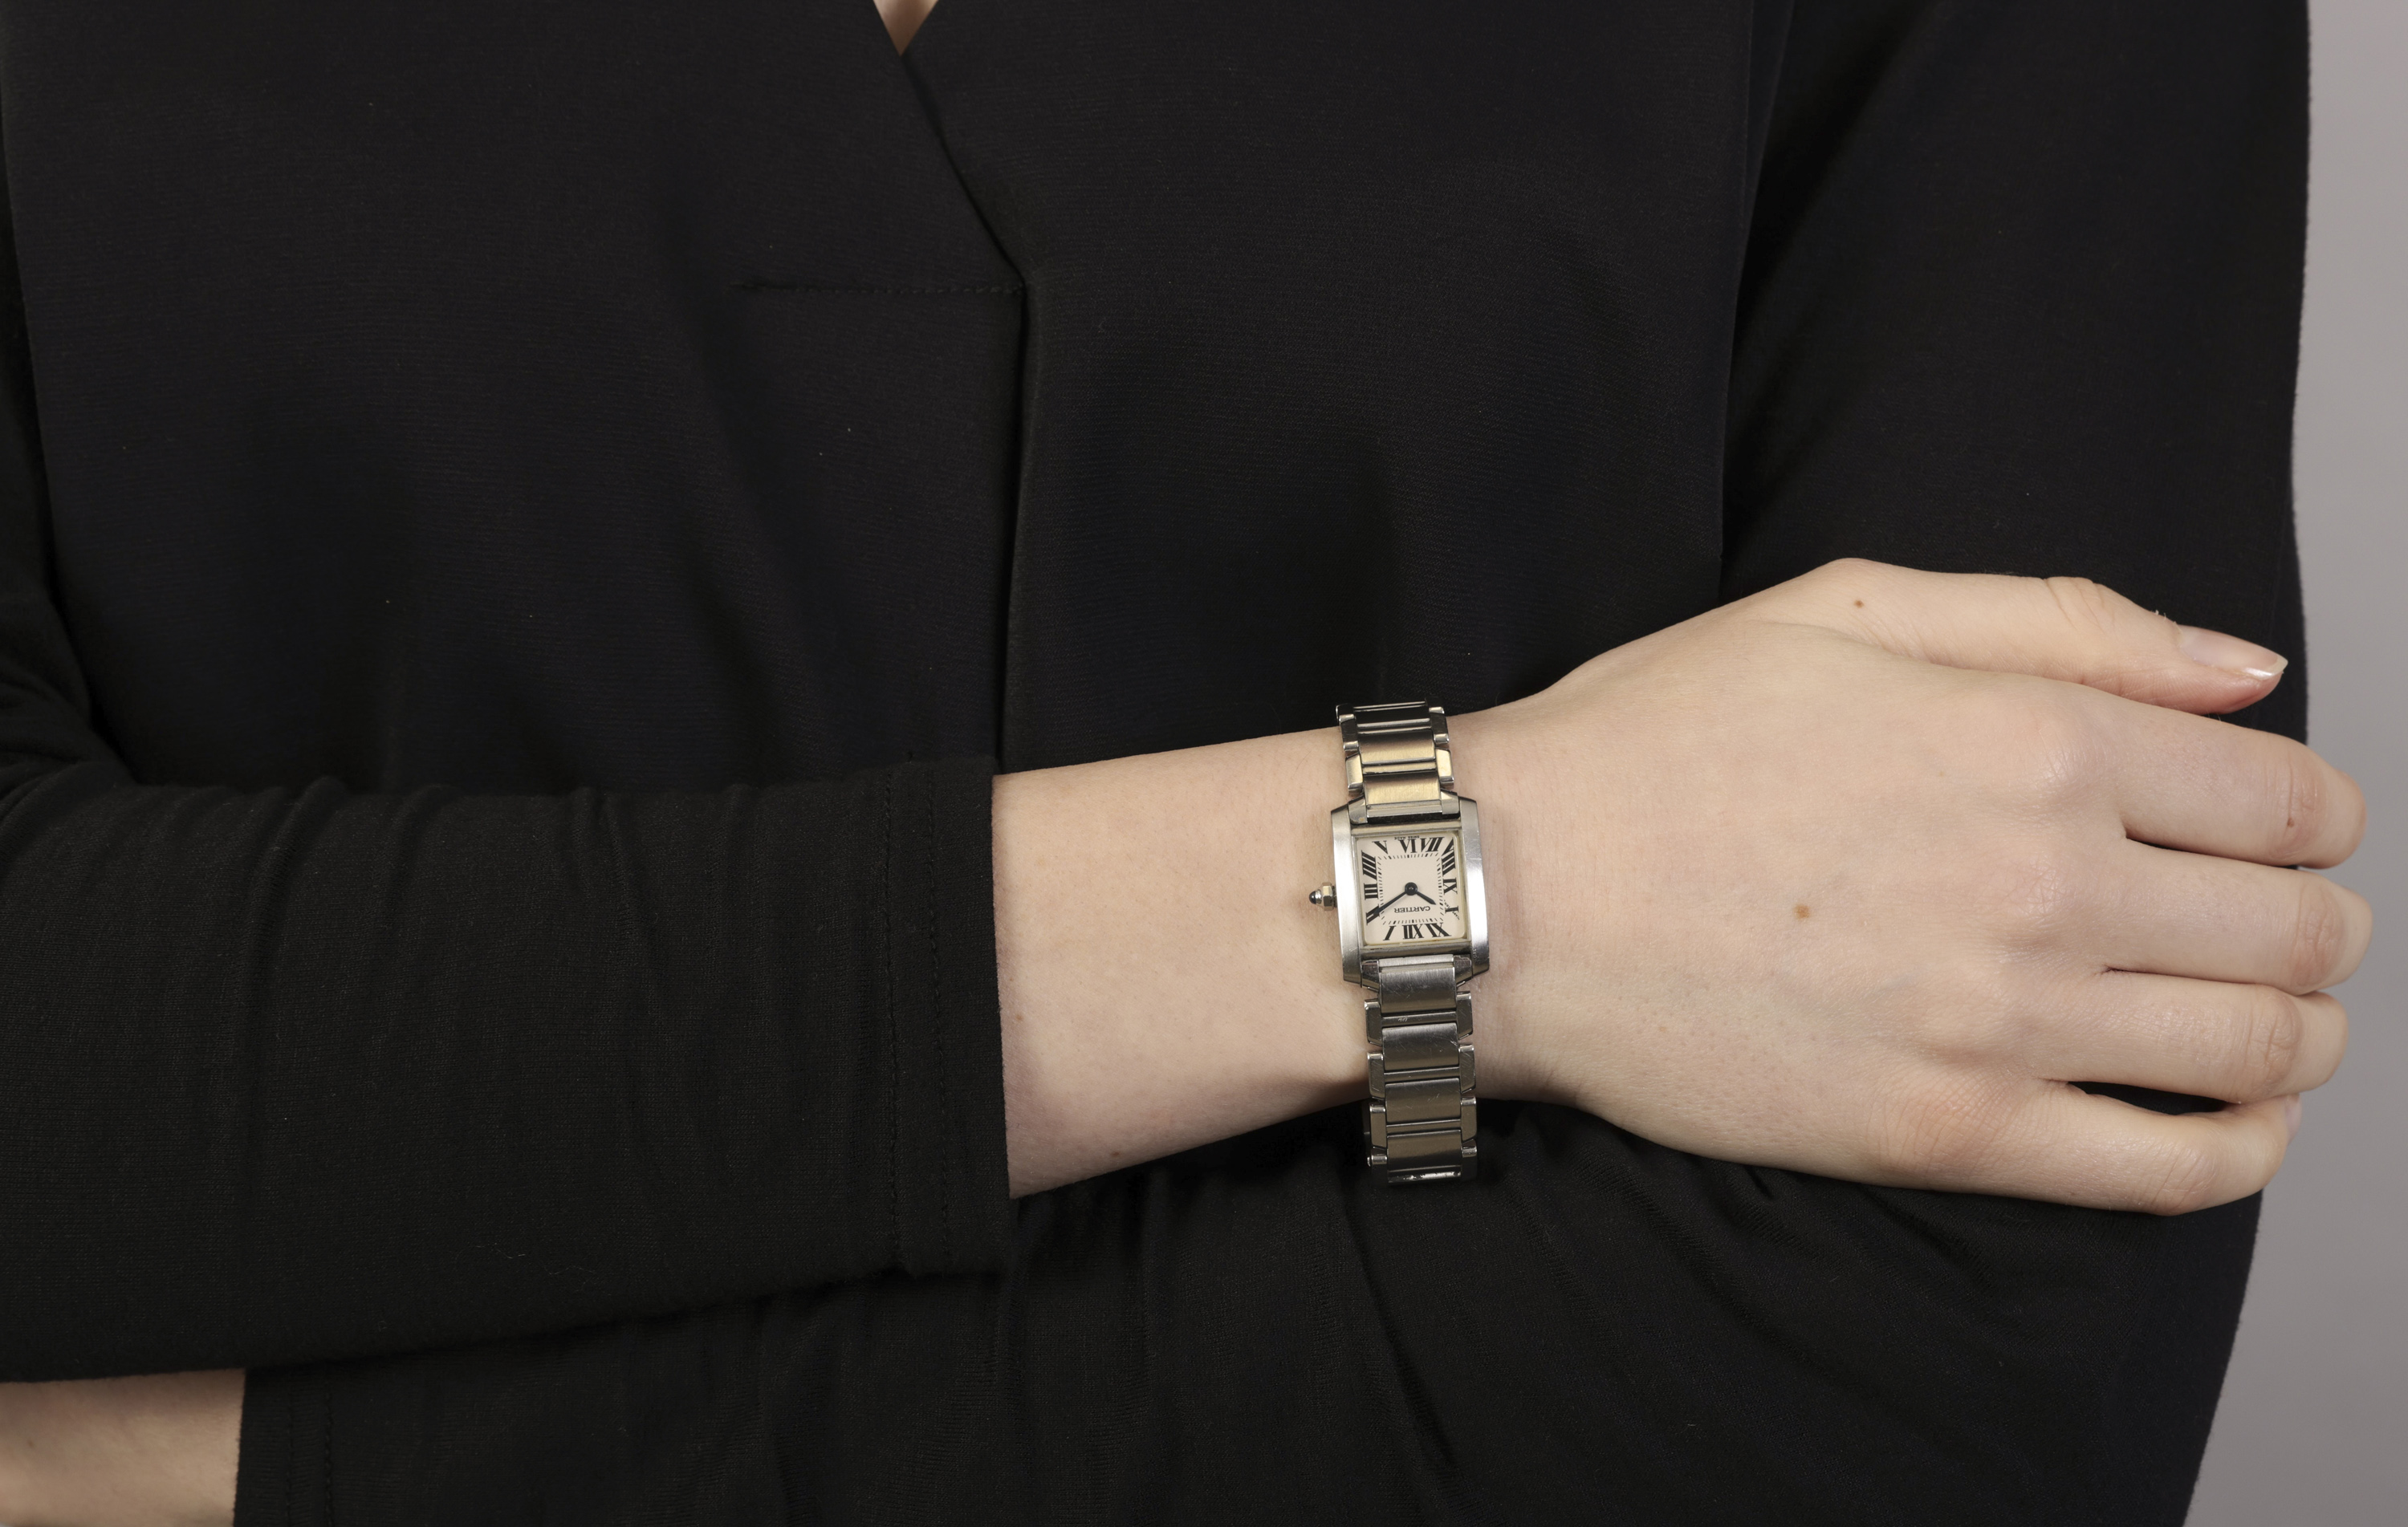 A LADY'S STAINLESS STEEL 'TANK FRANCAISE' QUARTZ BRACELET WATCH, BY CARTIER 4-jewel Cal. 057 - Image 4 of 7